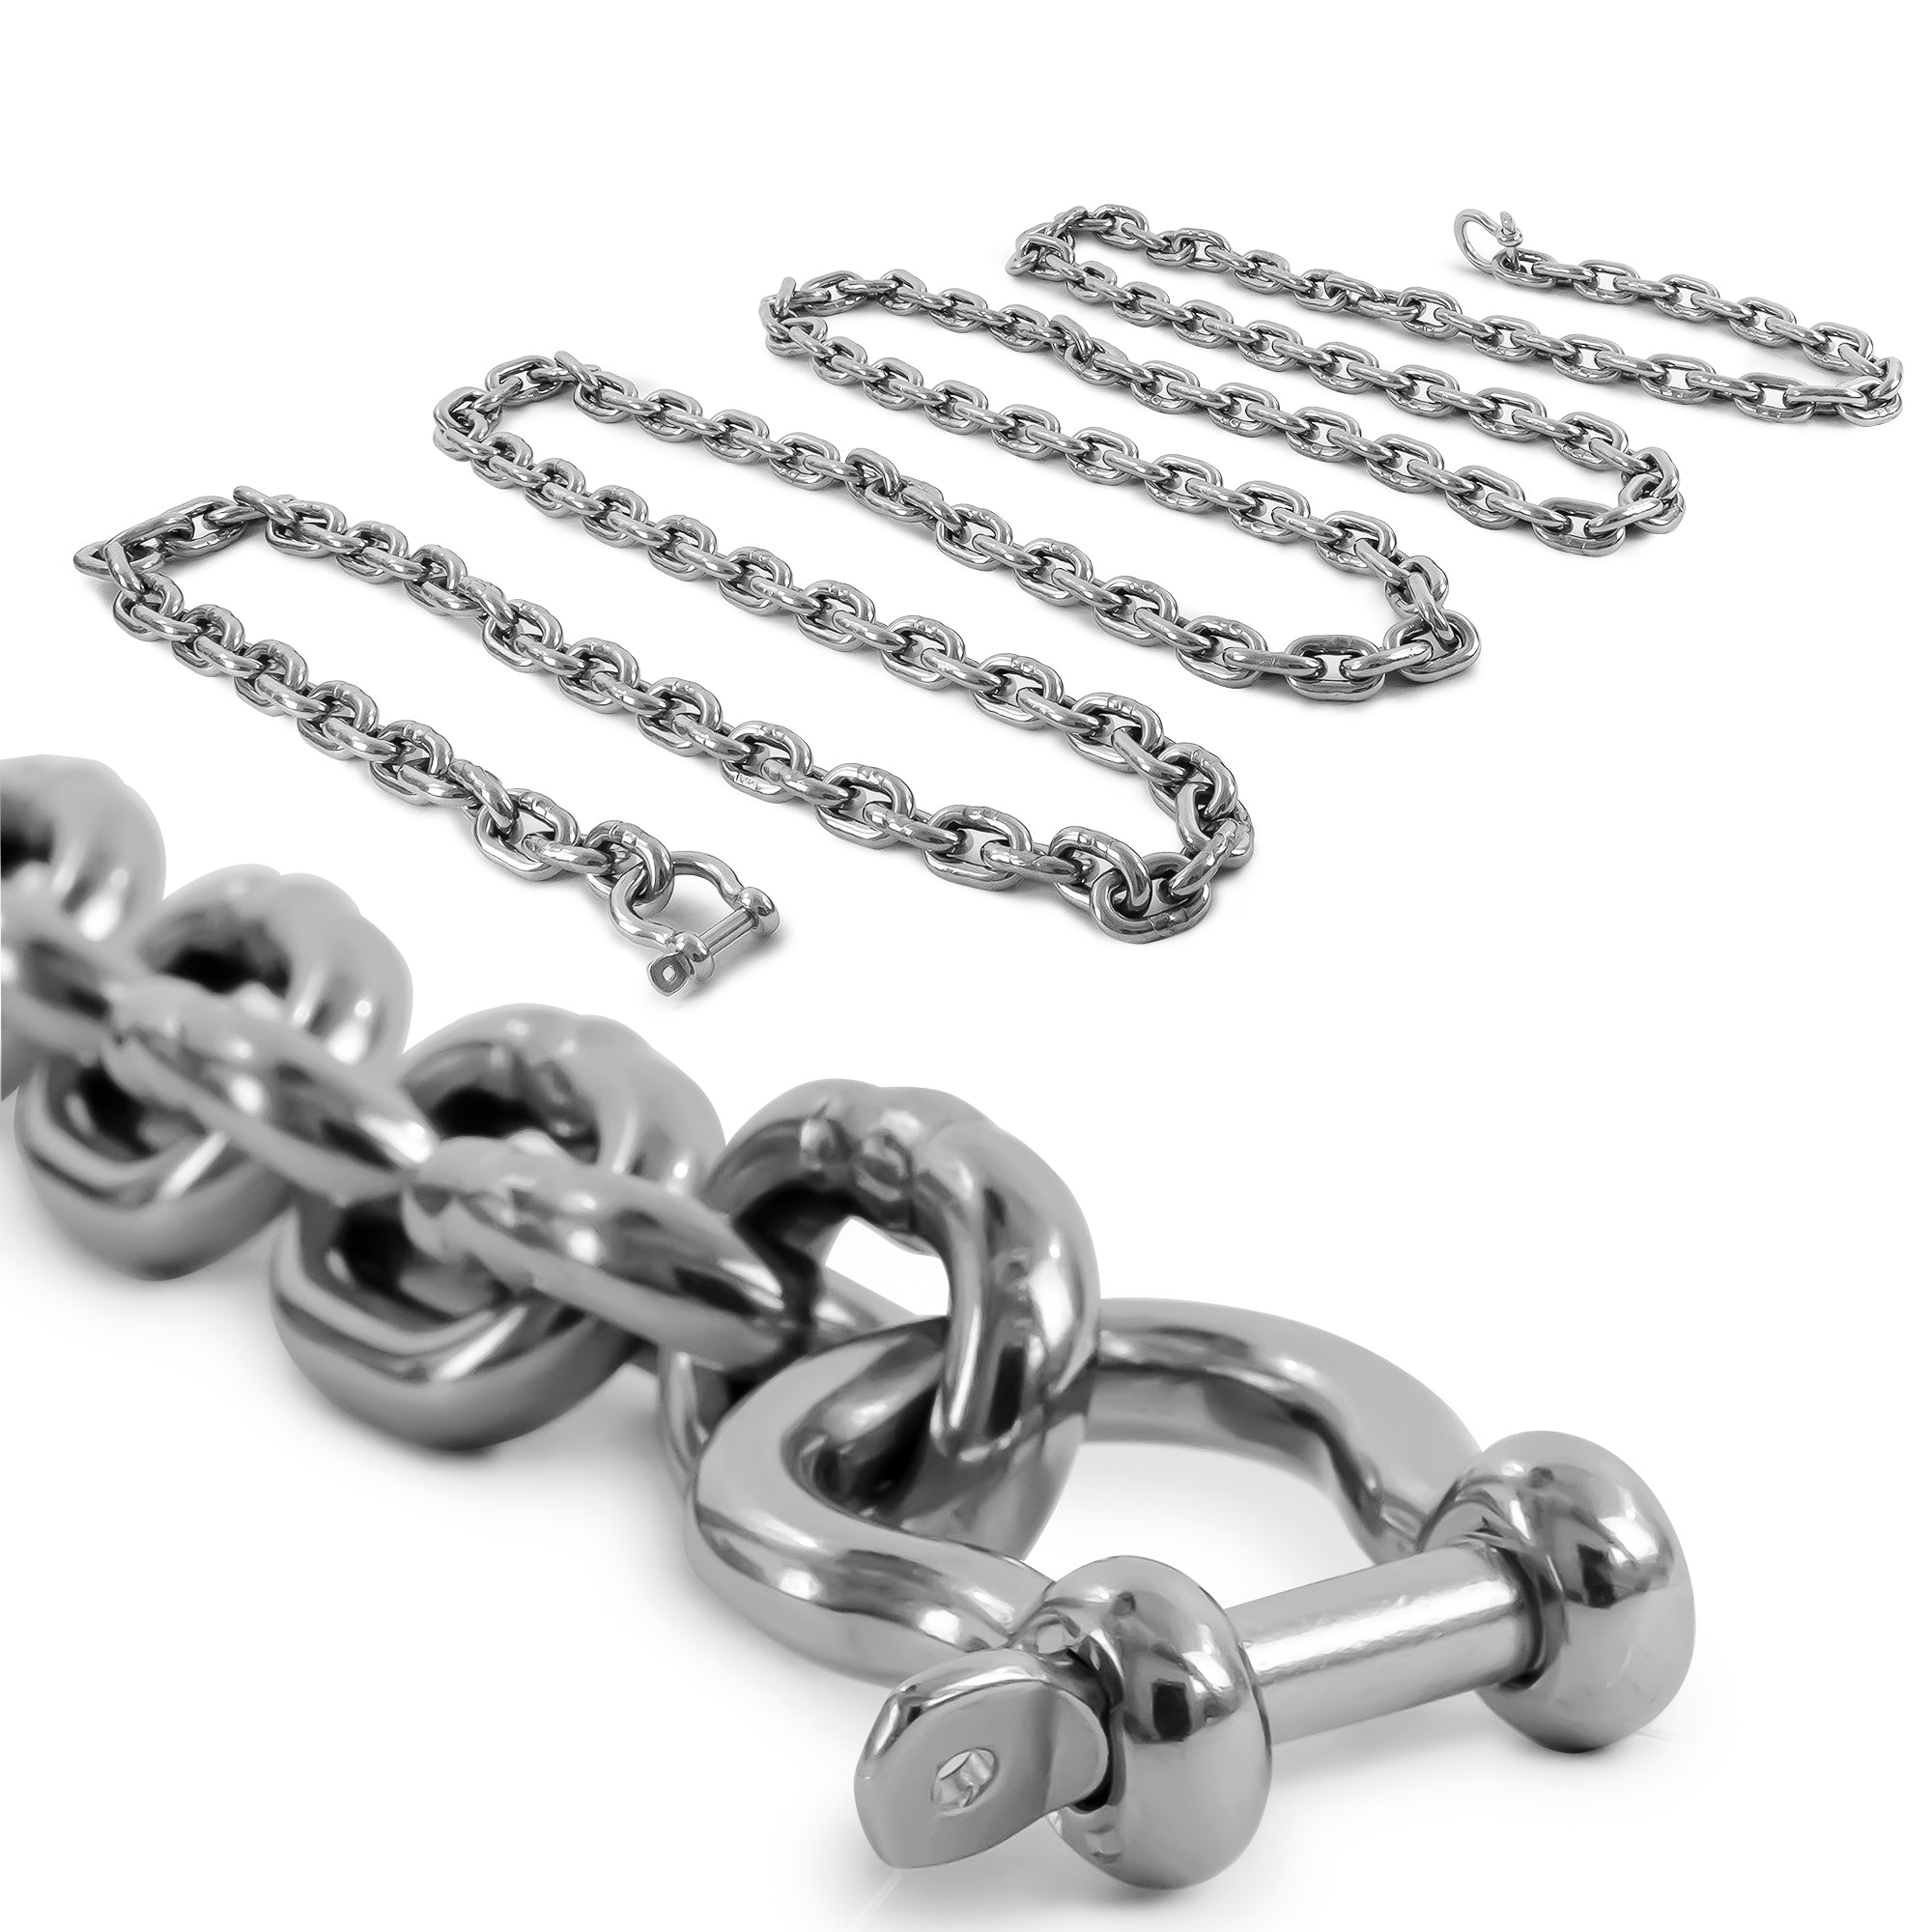 Anchor Lead Chain 5/16" x 15', HTG4 Stainless Steel - FO4493-S15